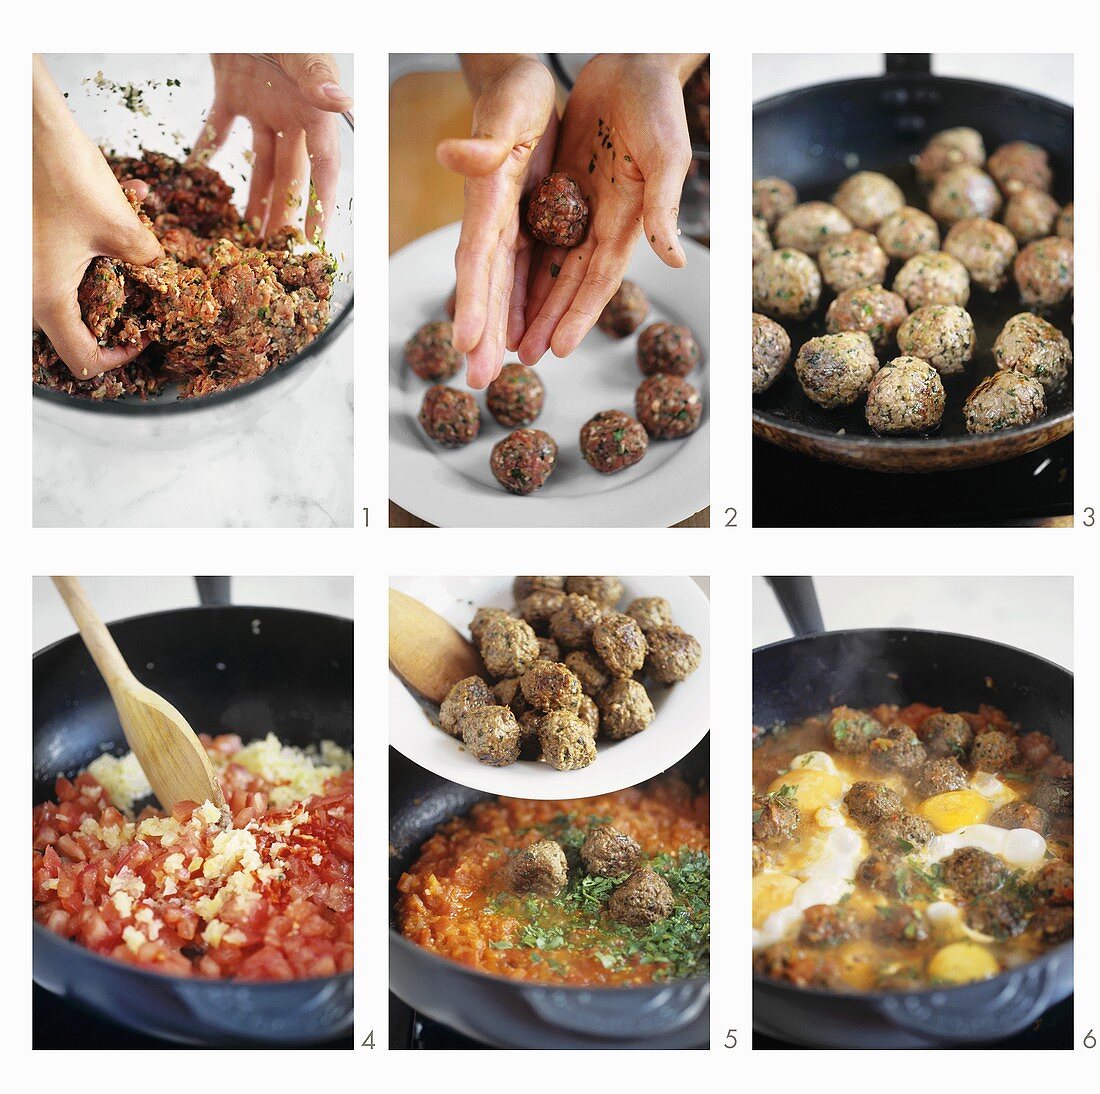 Making meatball tagine with tomato sauce and eggs (Morocco)